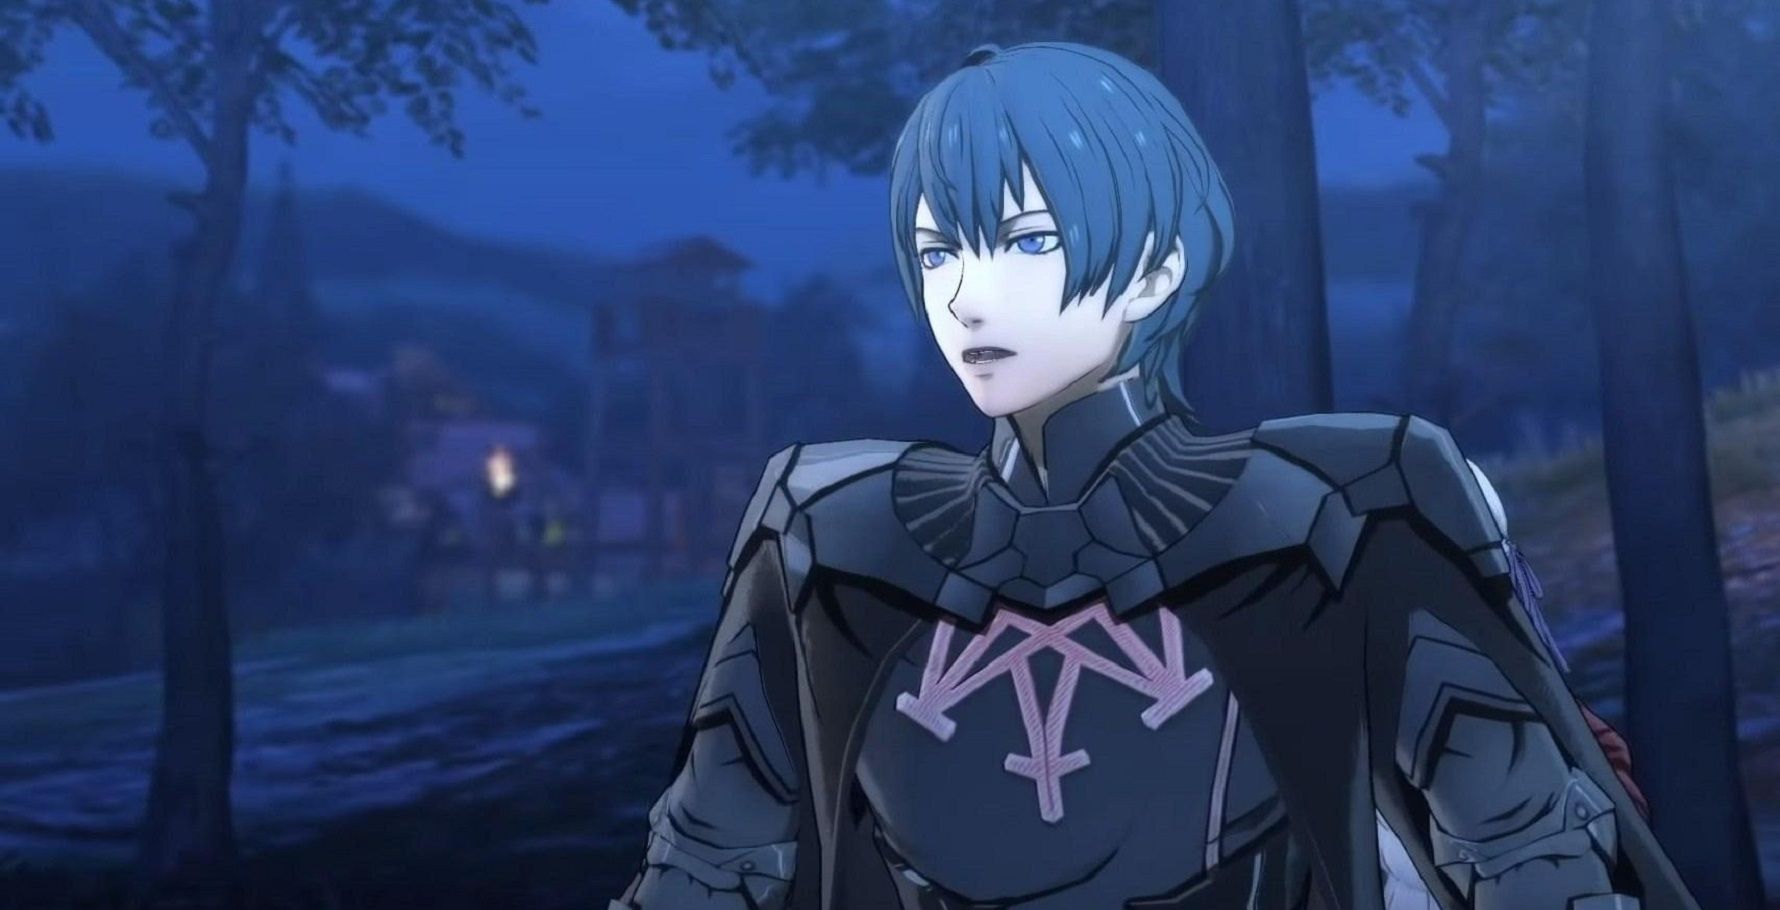 Fire Emblem: Ranking Every Byleth Outfit